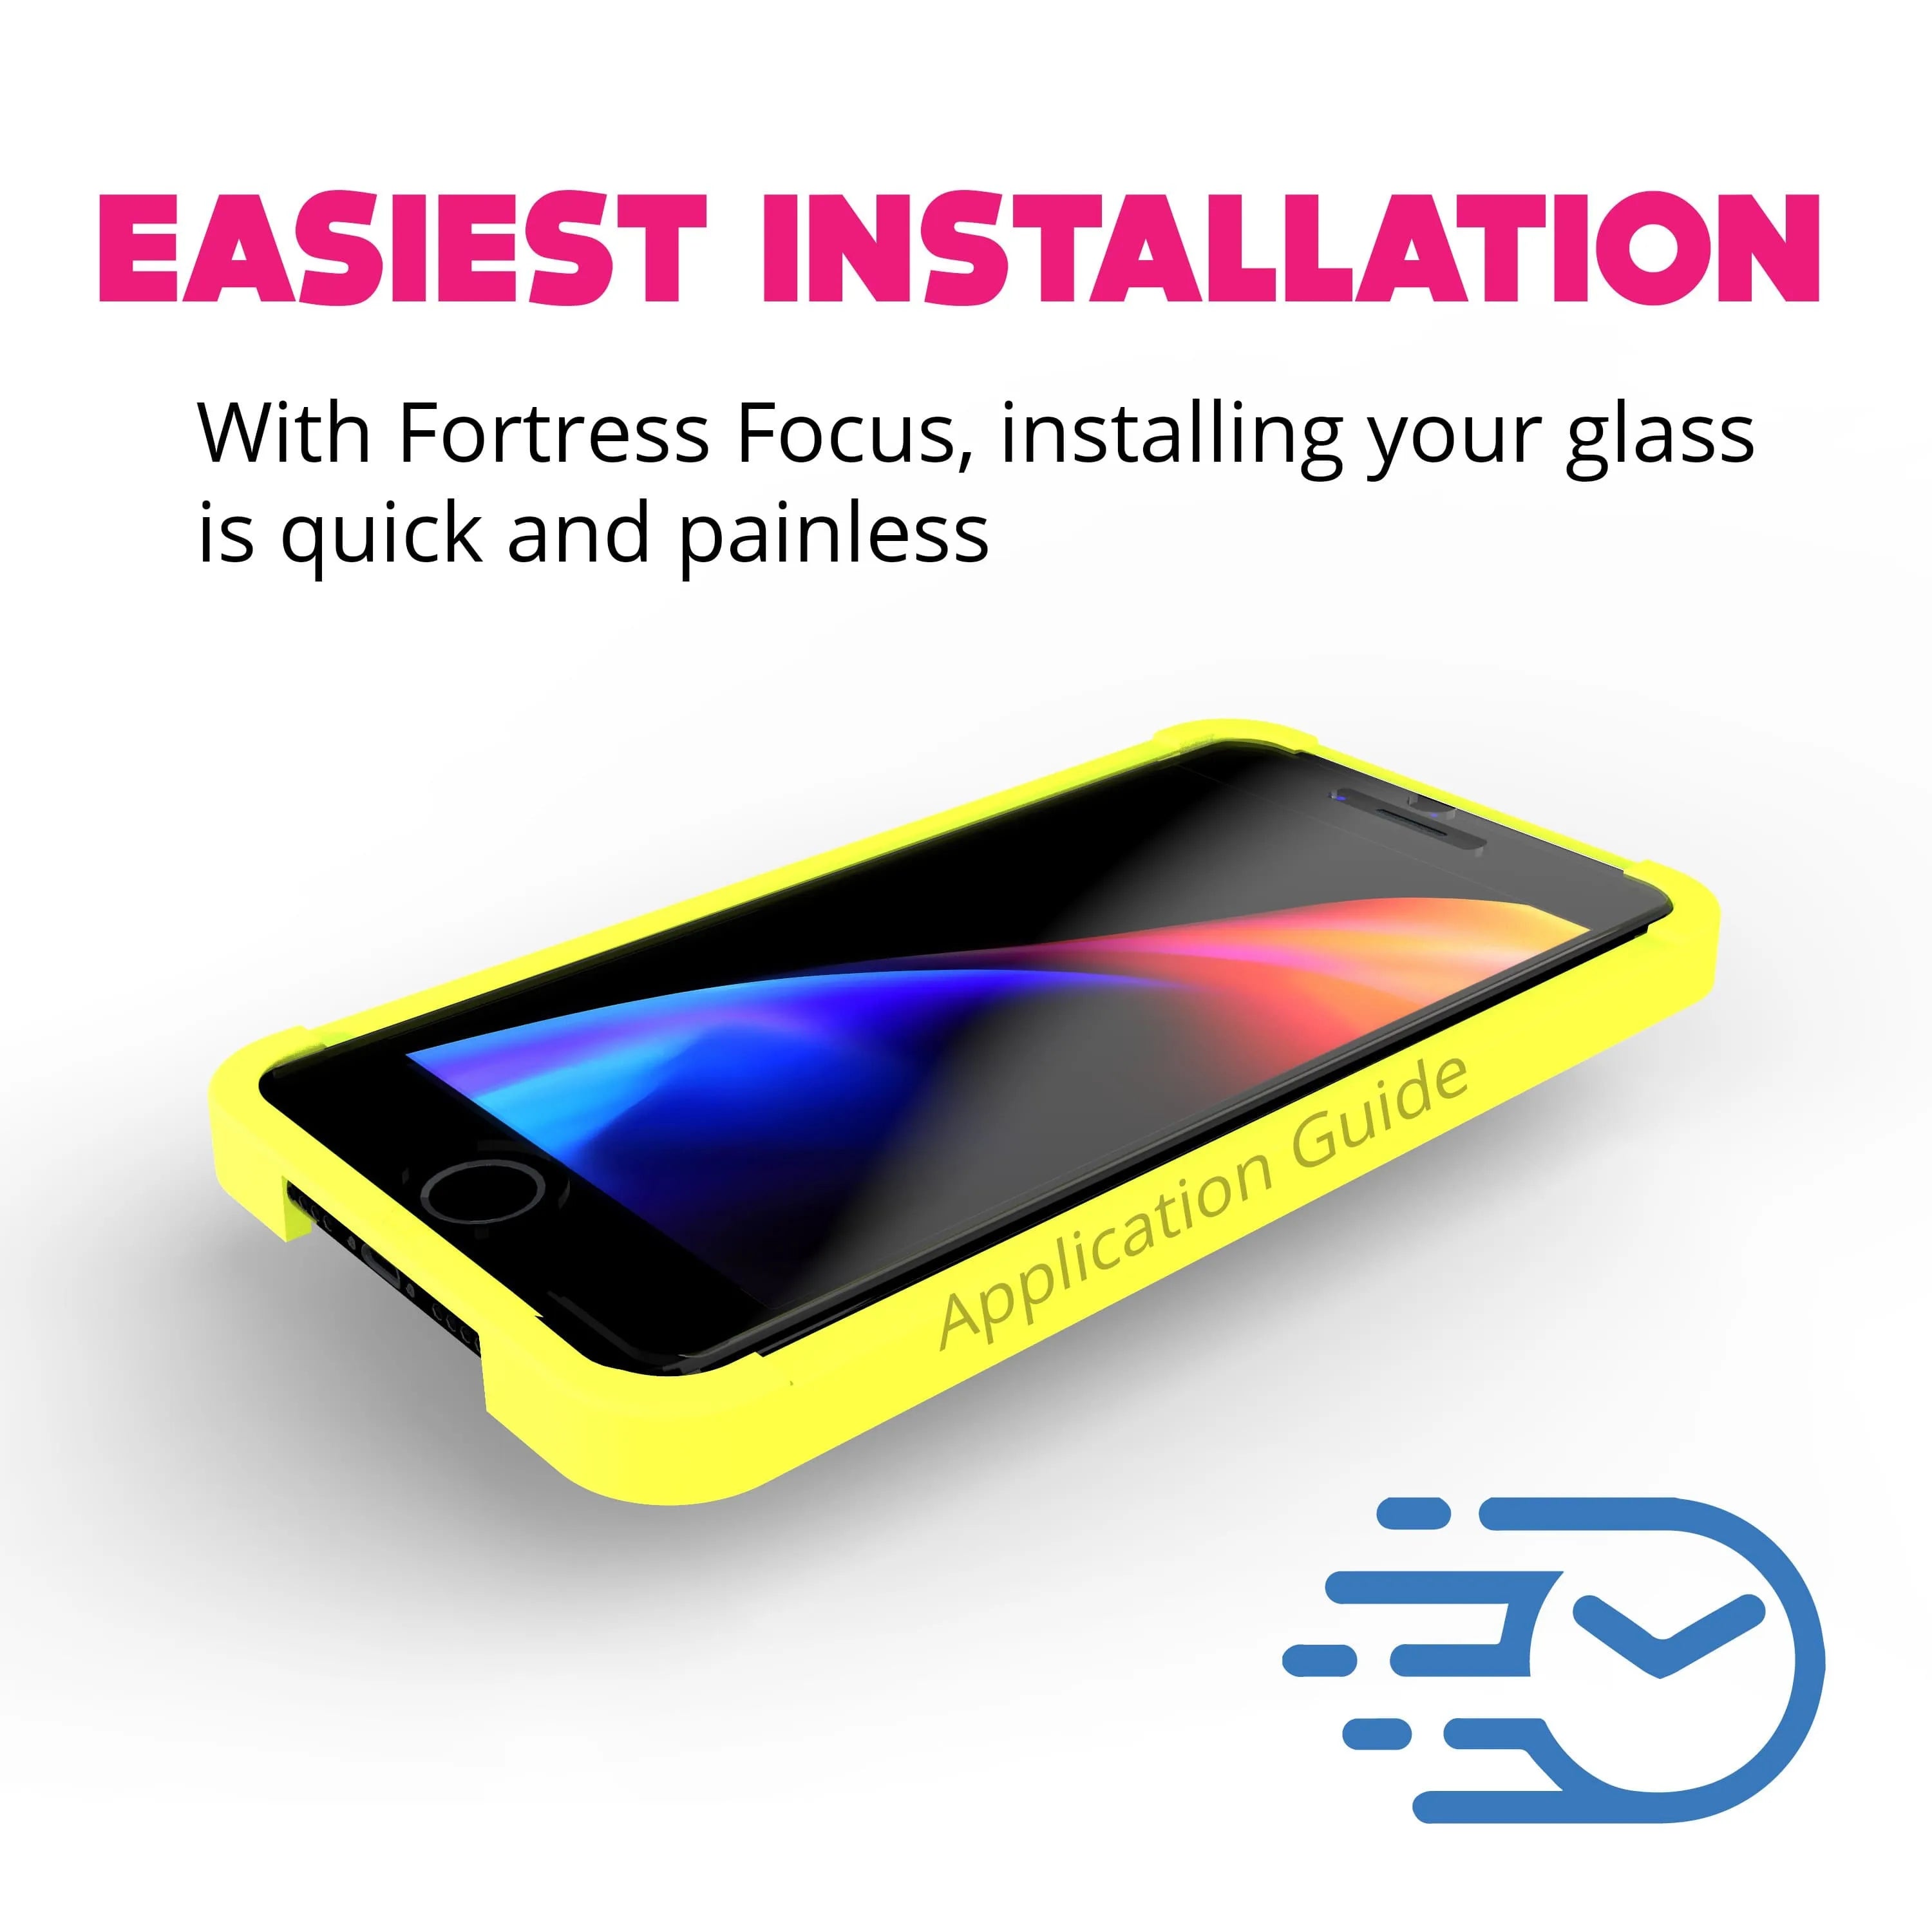 Fortress iPhone 8/7 Plus Screen Protector - $200 Device Coverage  Scooch Screen Protector